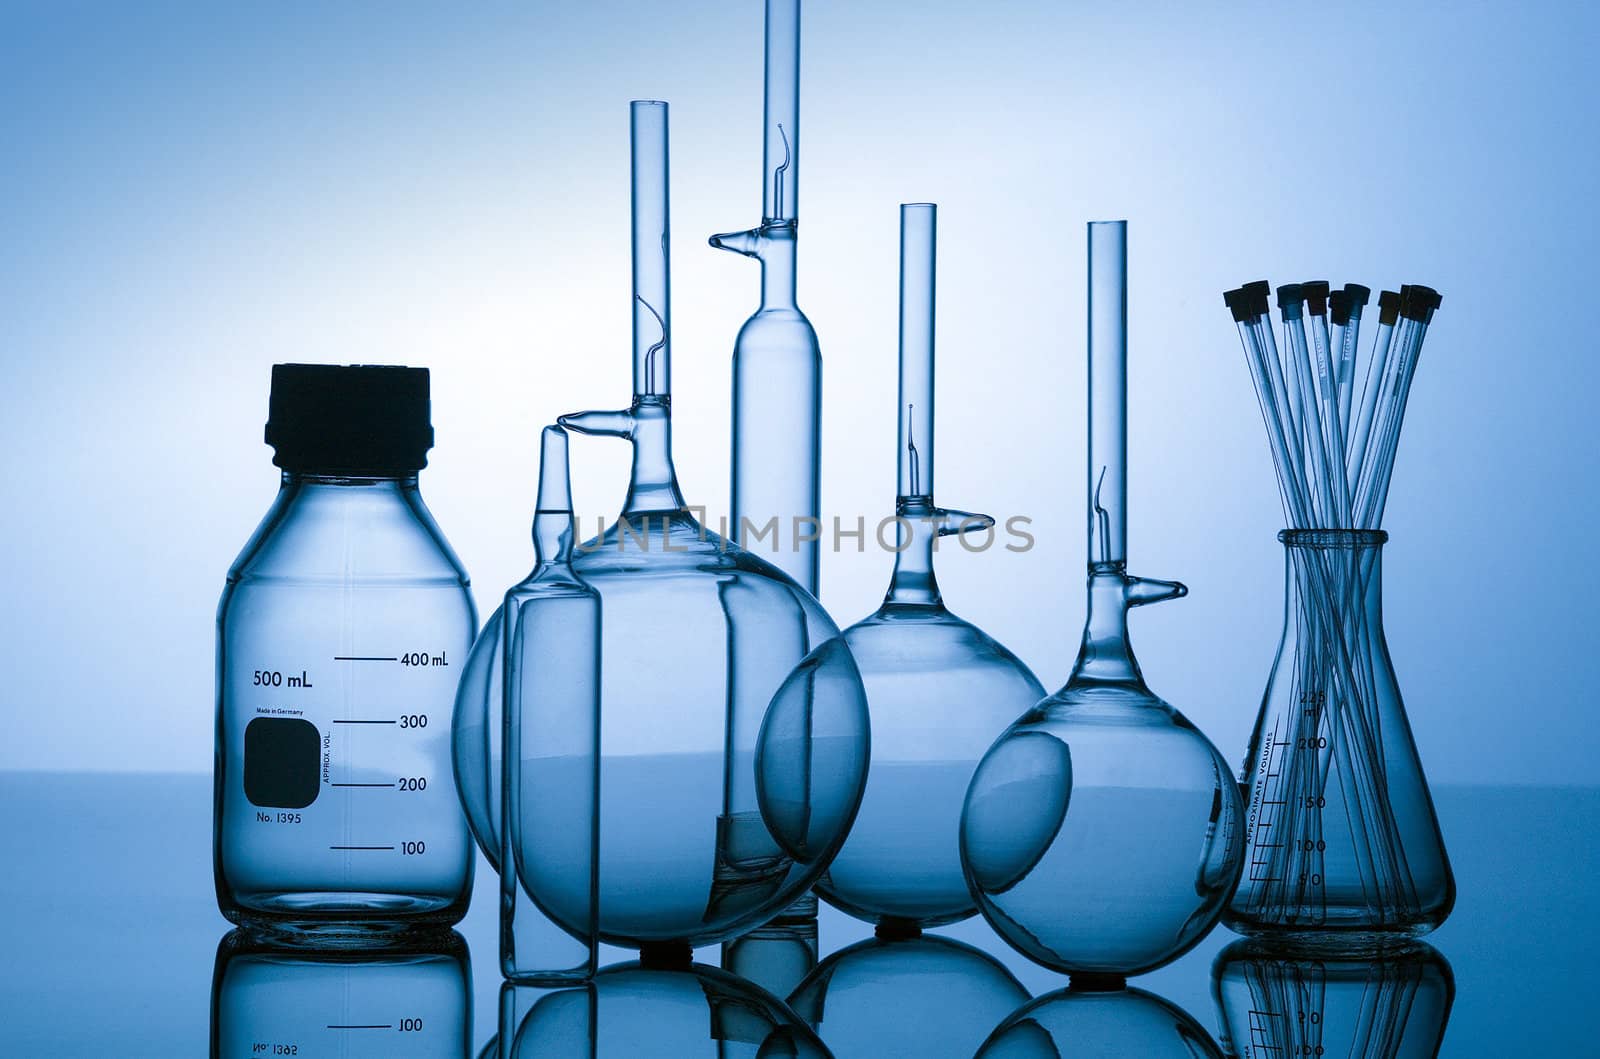 Chemical glass flasks and beakers used in the pharmaceutical industry